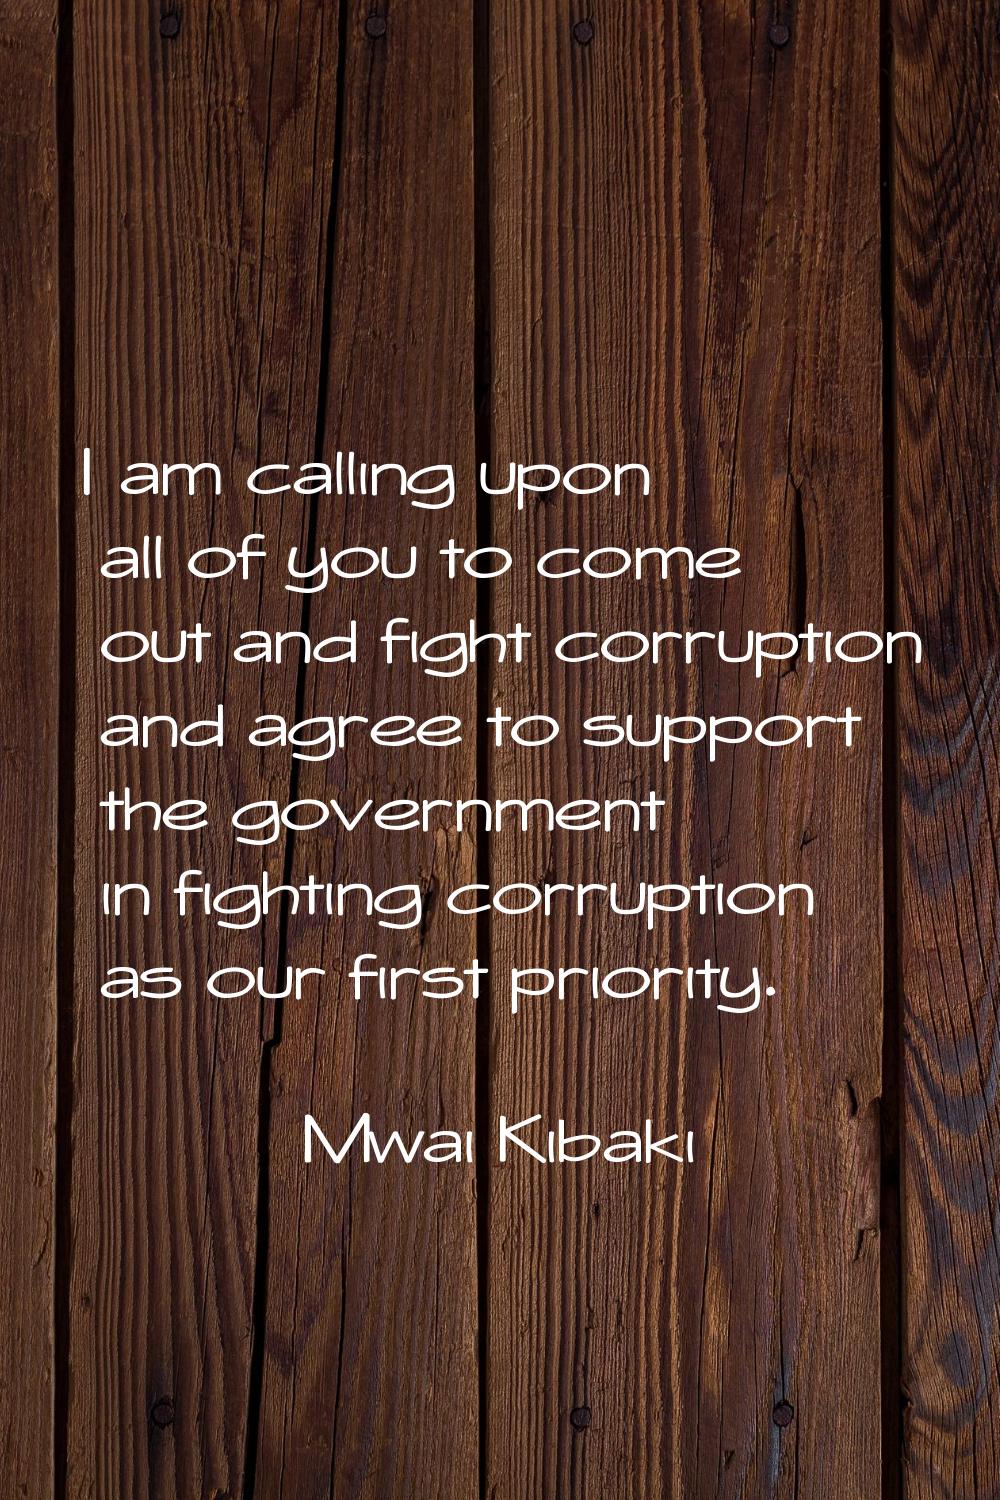 I am calling upon all of you to come out and fight corruption and agree to support the government i